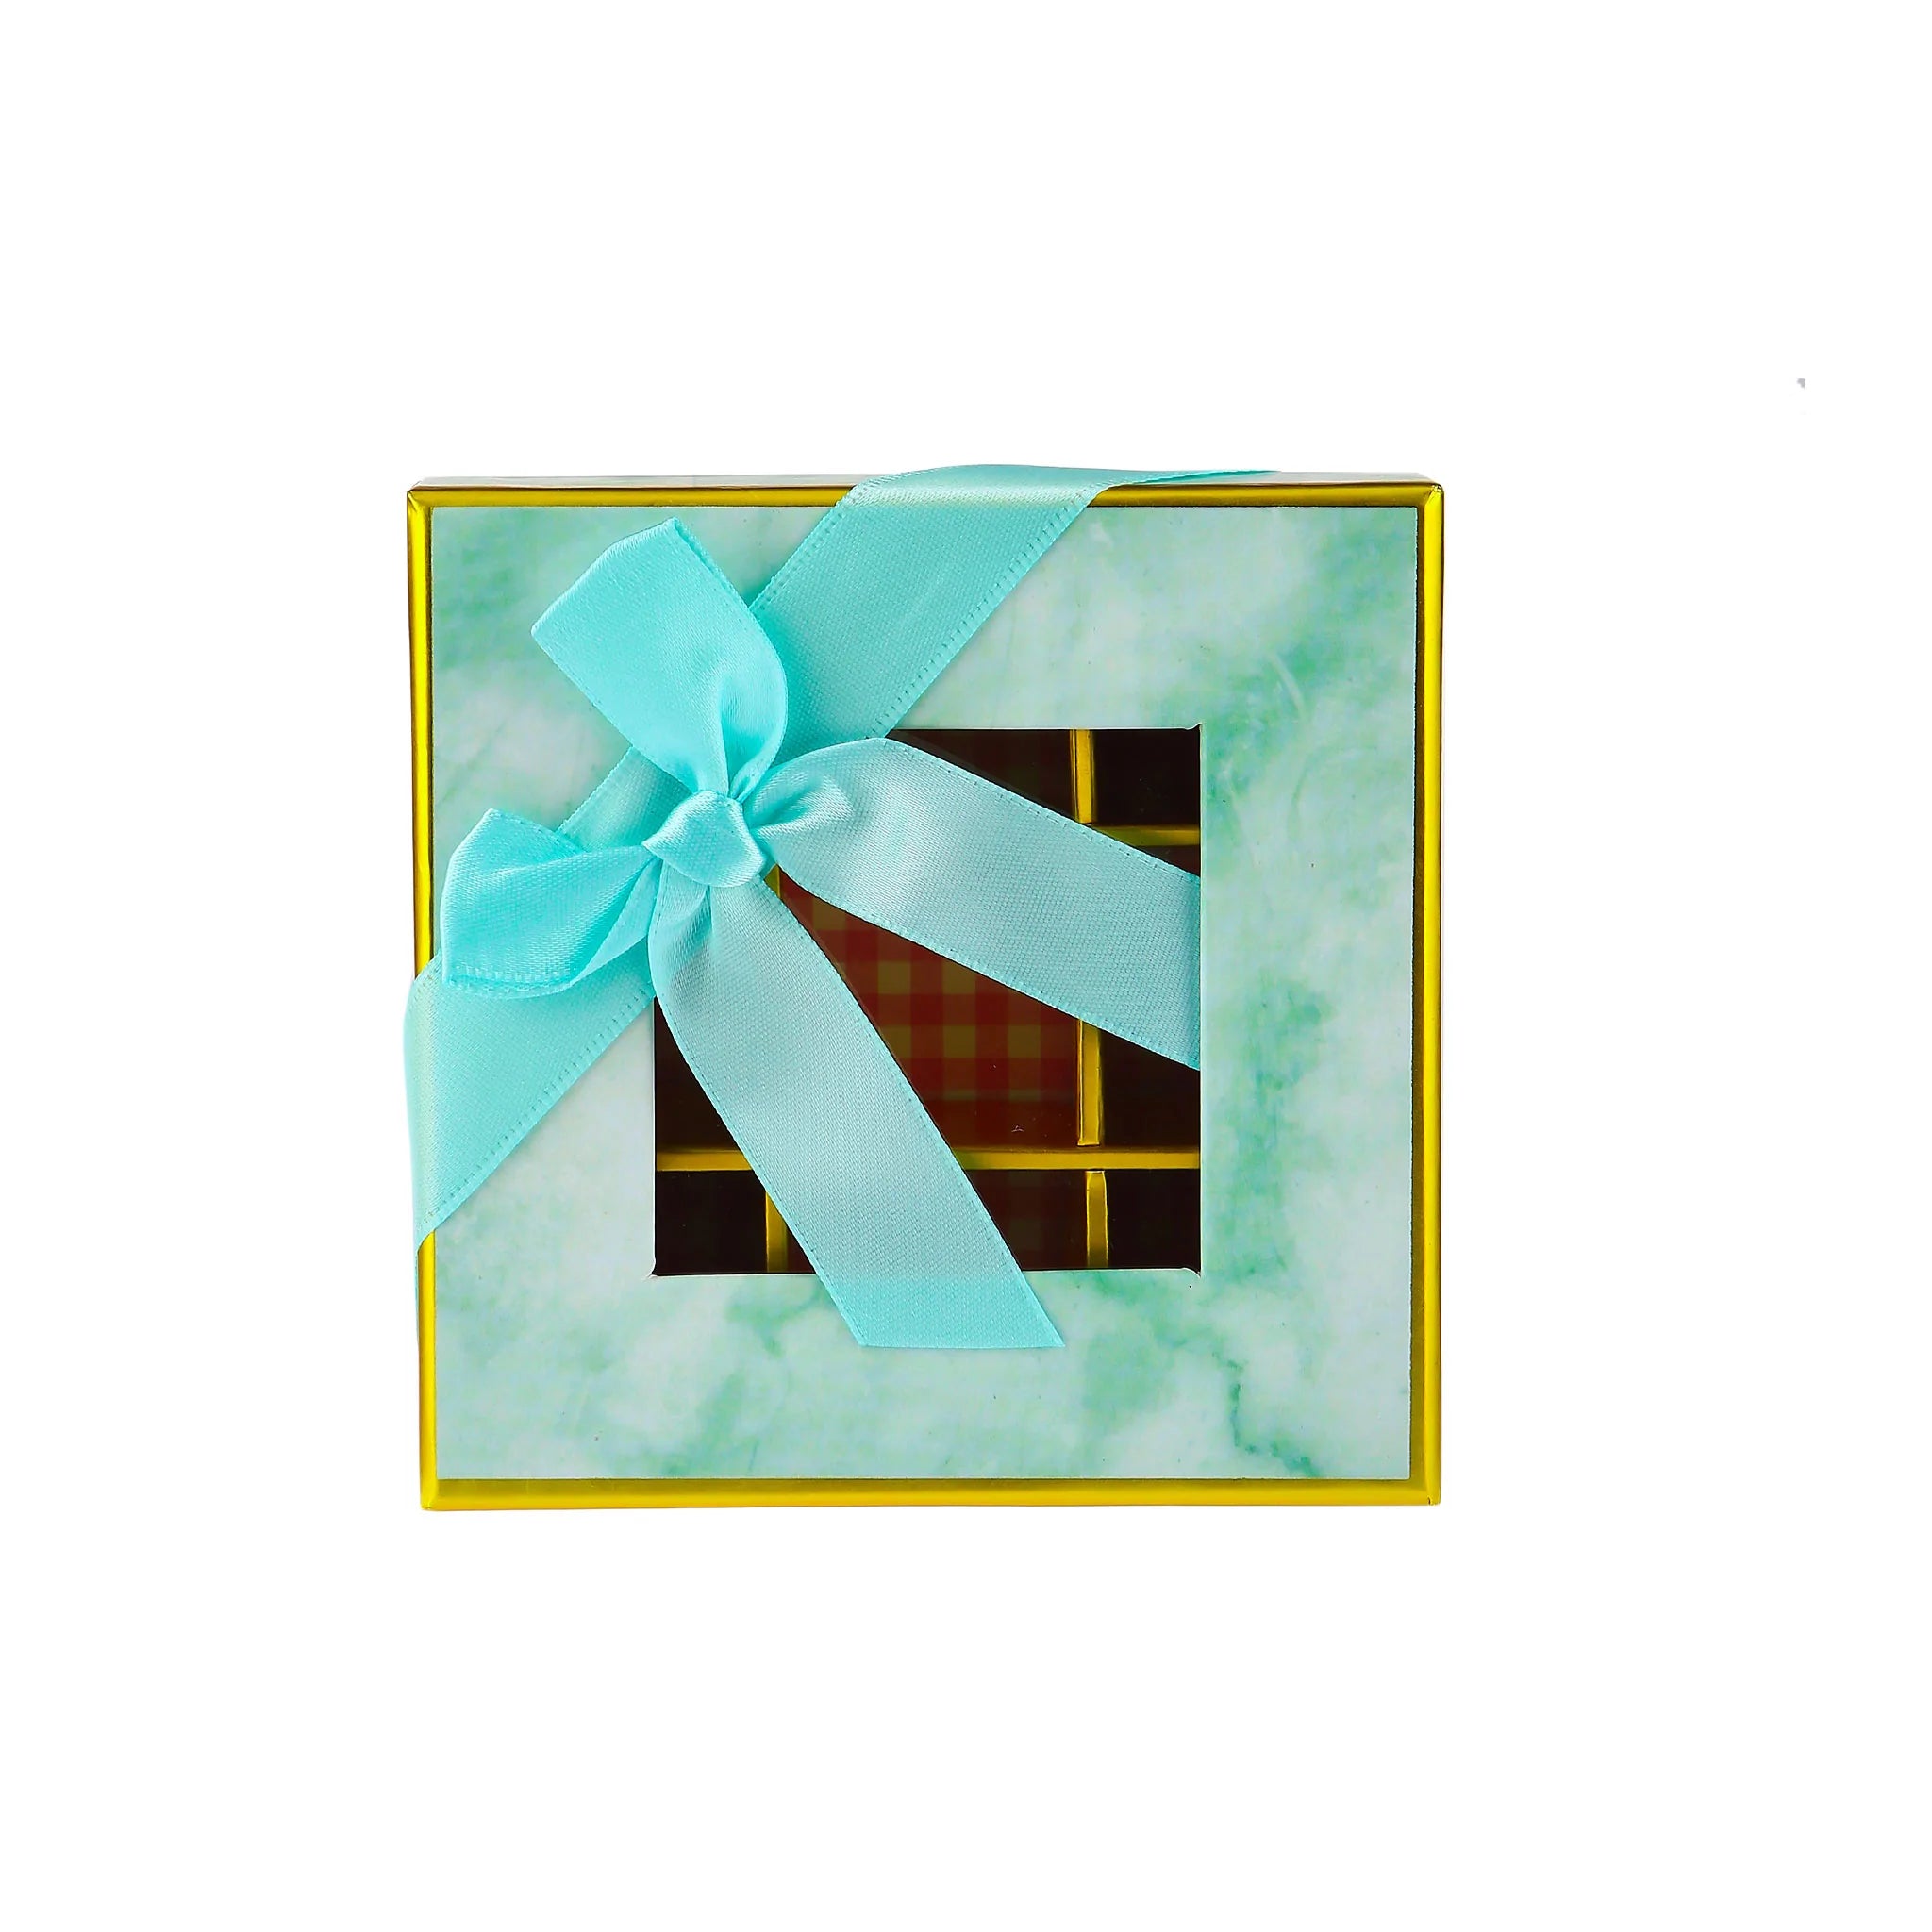 48 Pieces Square Blue Chocolate Gift Box Shape 09 Division - 12*12*4 cm